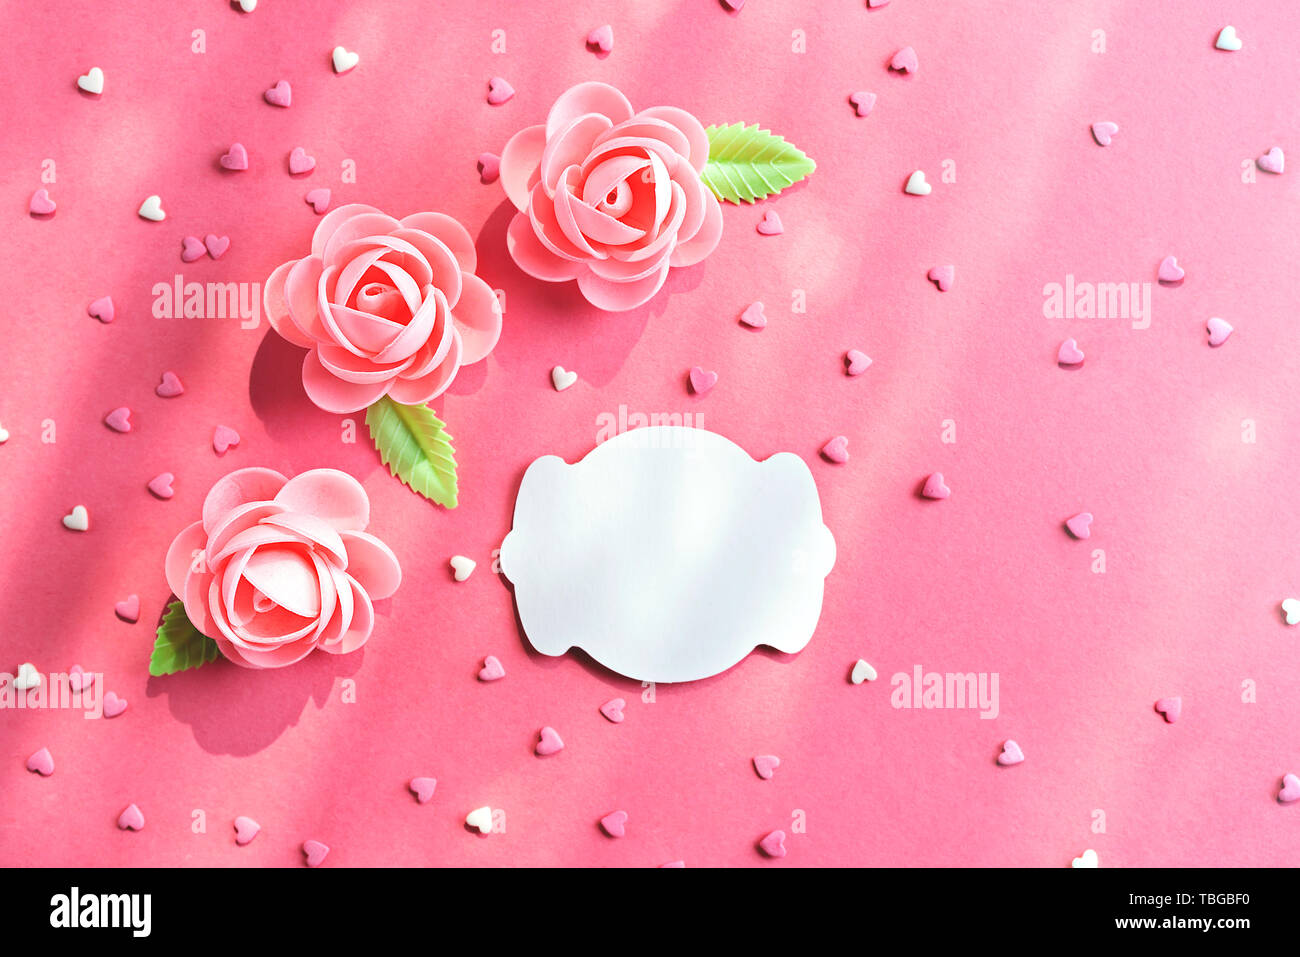 Pink background with sweet flowers and heart shaped confetti pastry. With space for a note. Flat lay Stock Photo